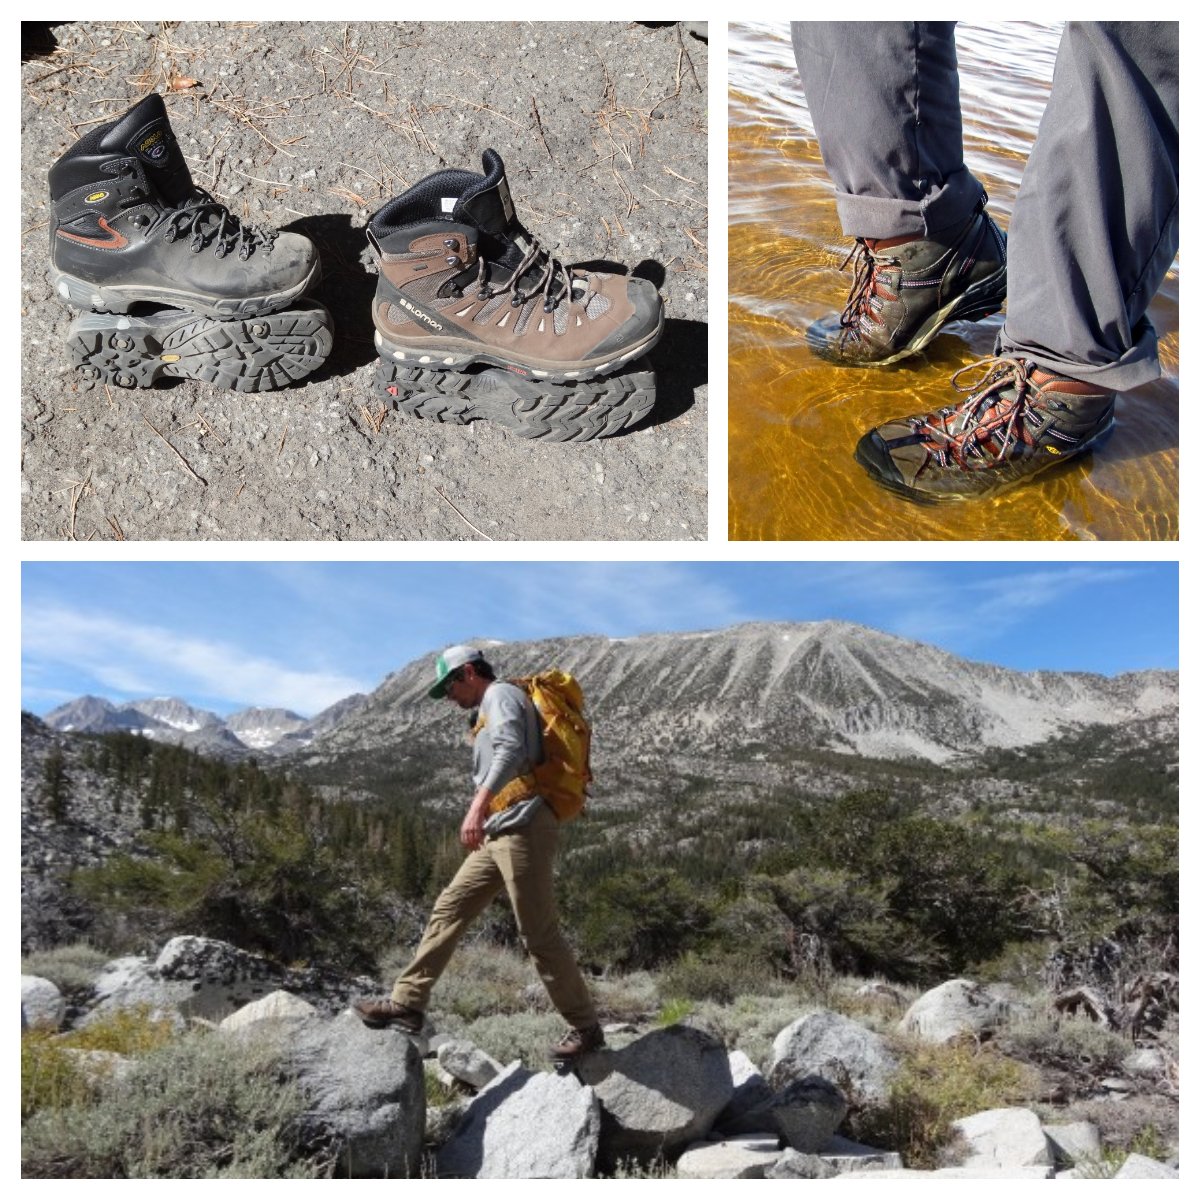 best hiking shoes outdoor gear lab